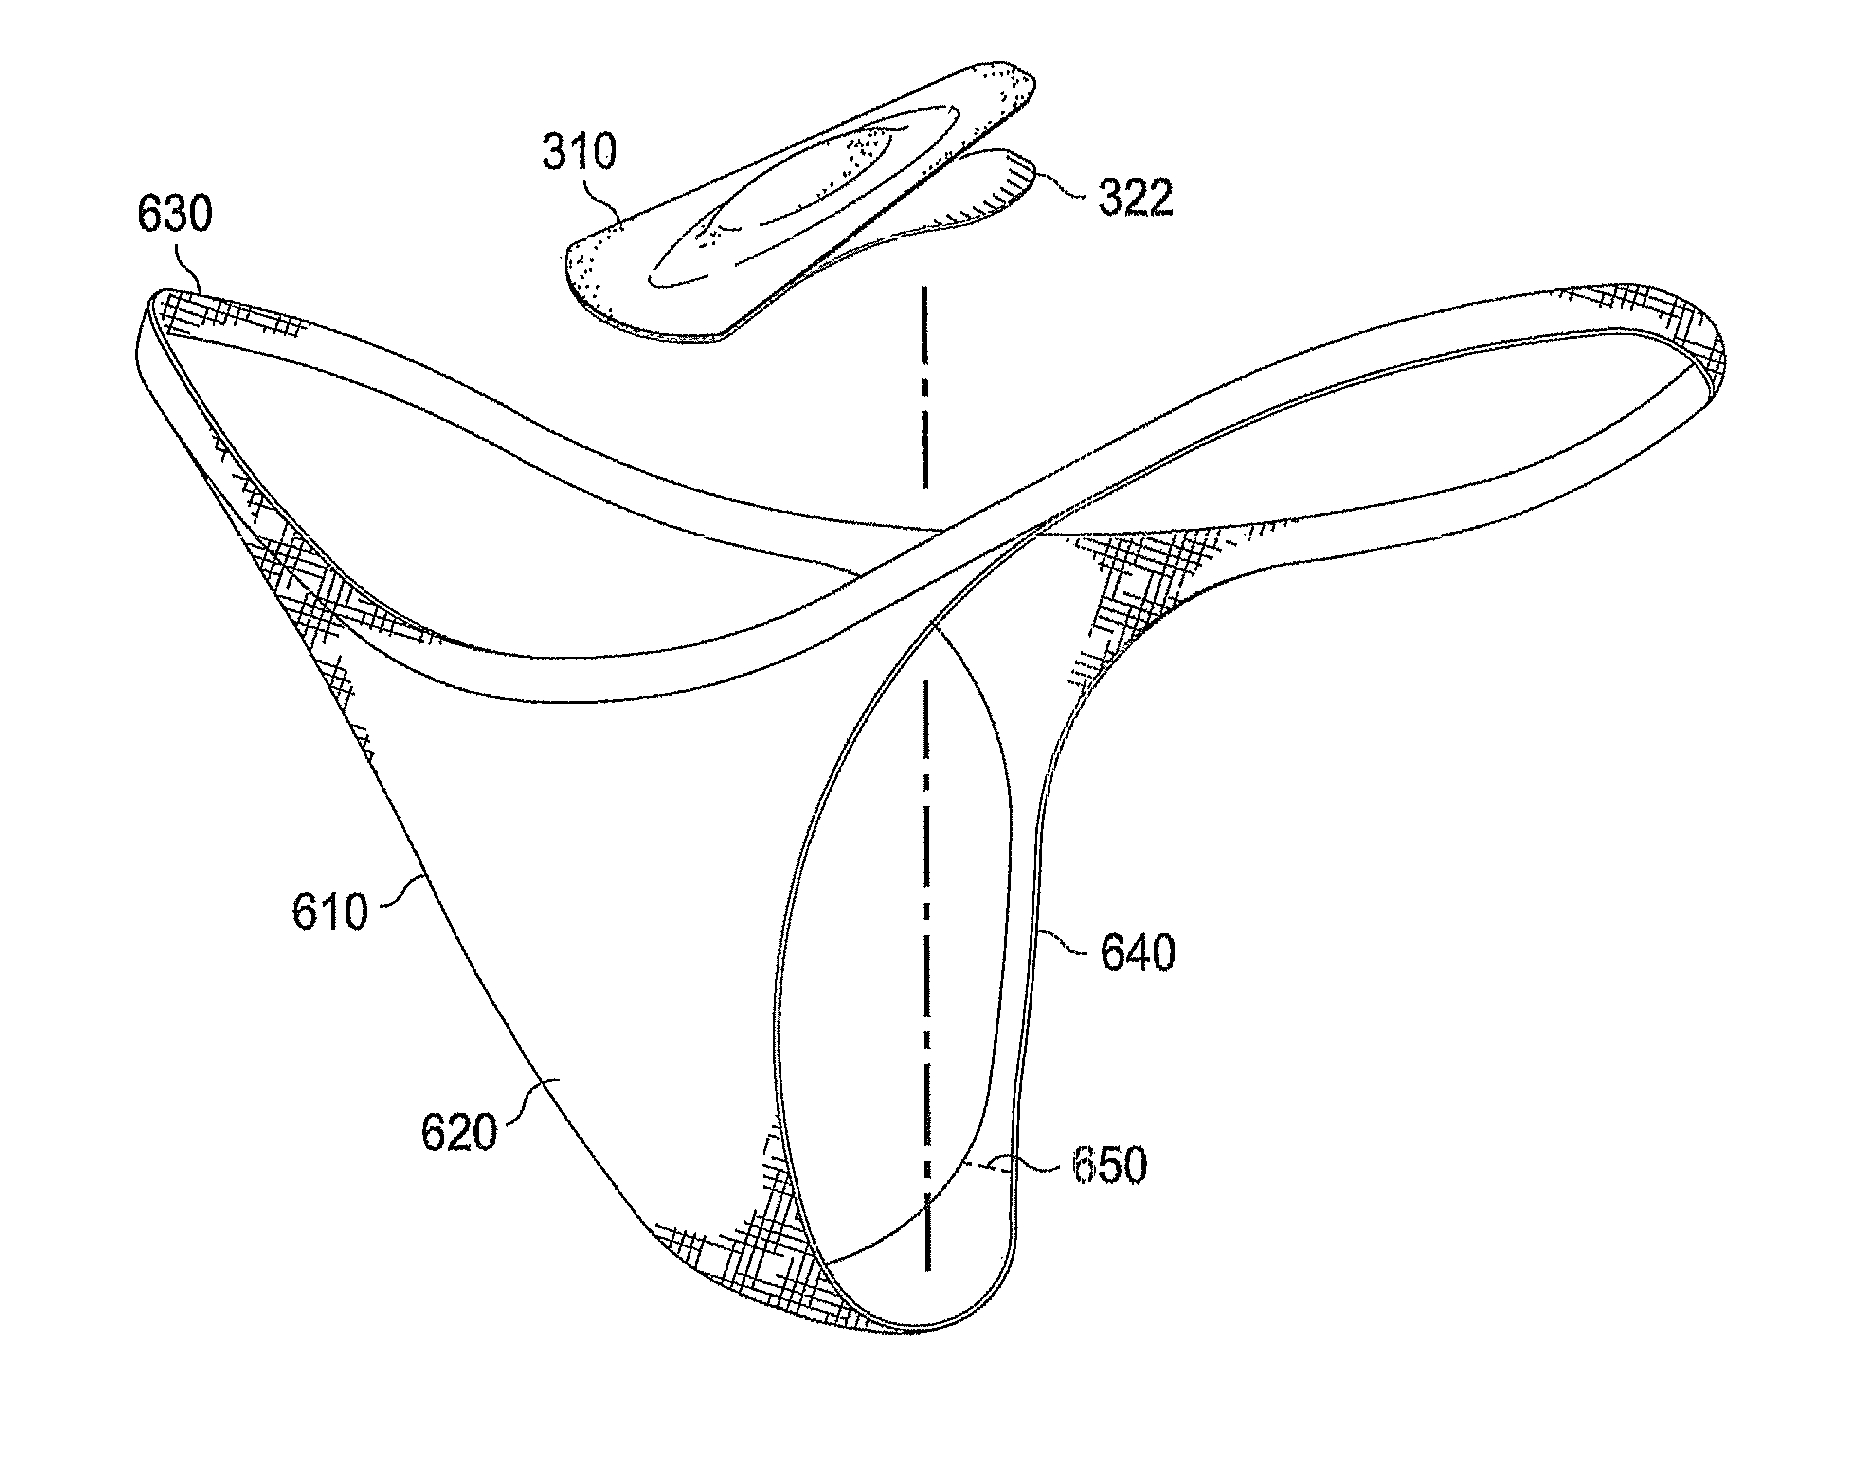 Three dimensional structural support for female pelvic organs in thong underwear